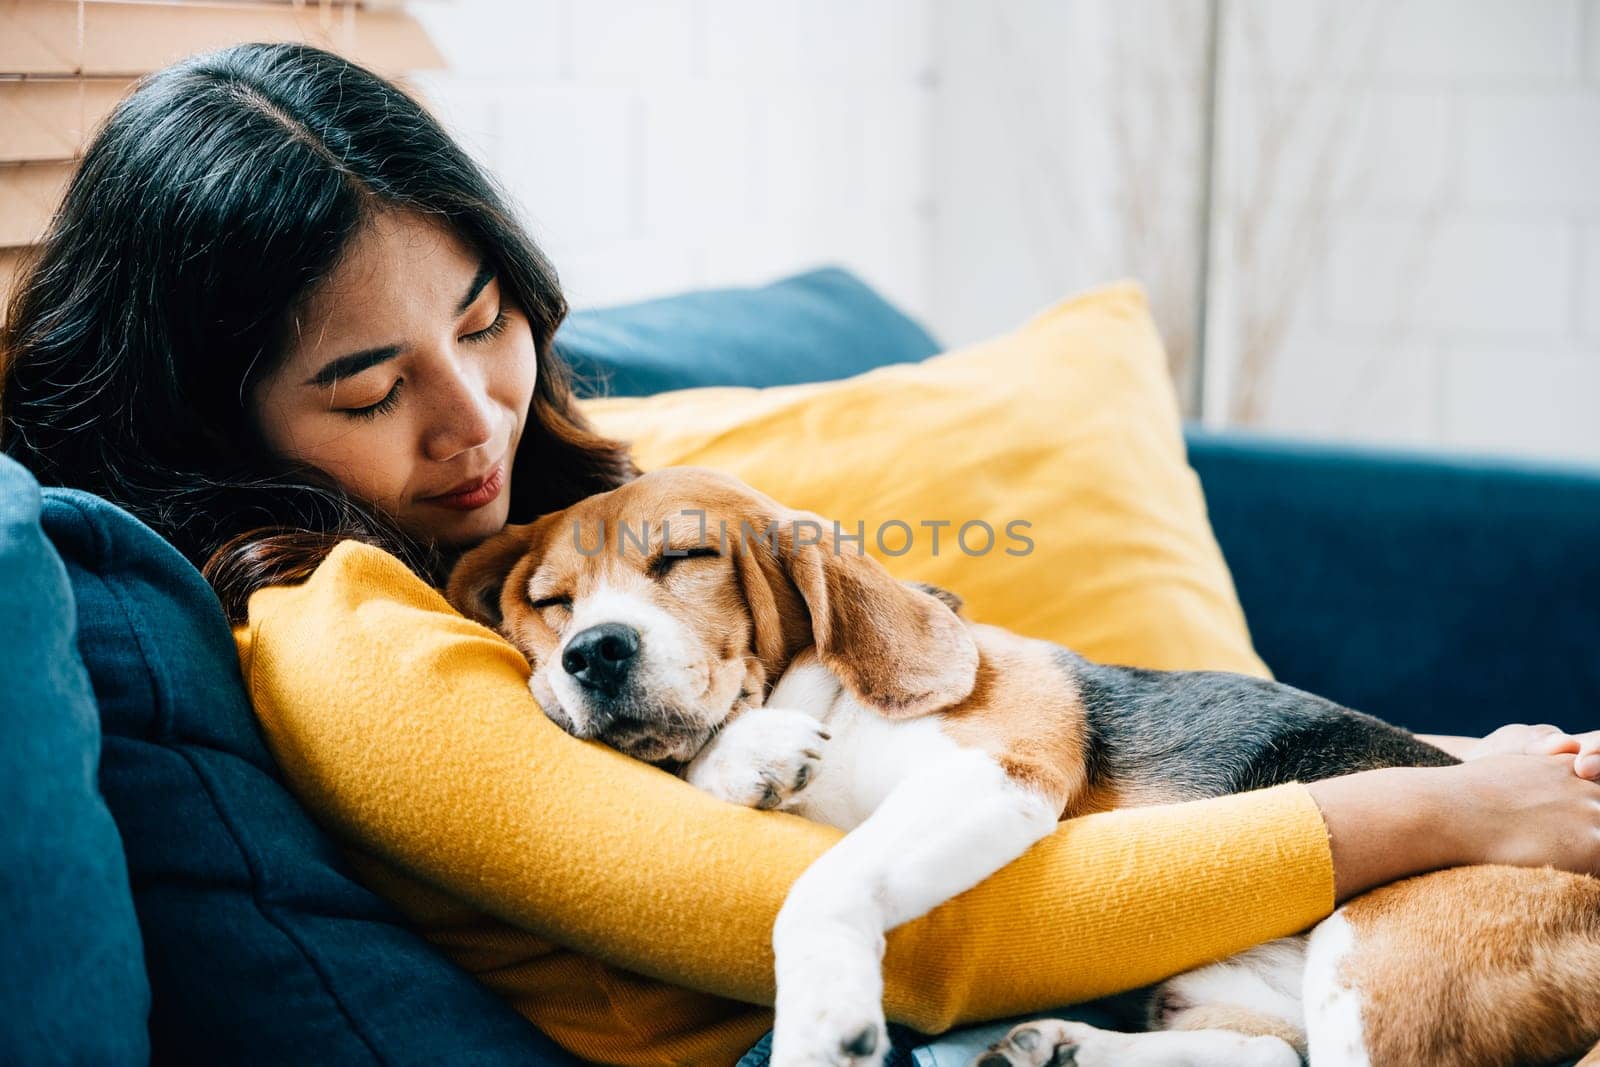 Embracing the concept of trust and love, an Asian woman and her Beagle puppy nap together on the sofa in their living room. Their bond is a beautiful portrayal of happiness and togetherness at home.